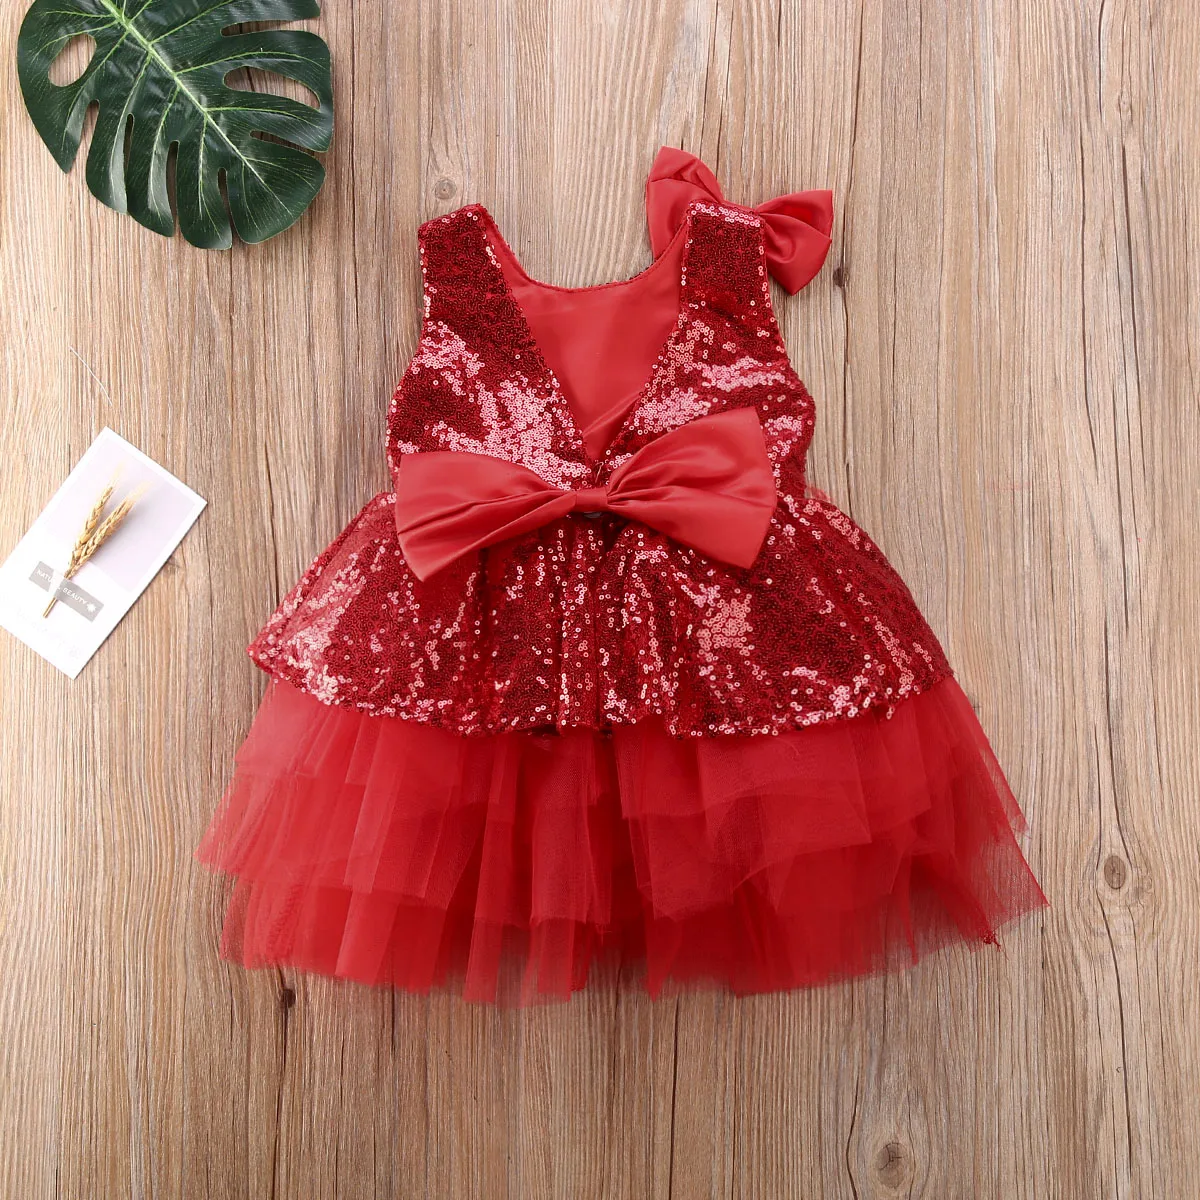 

Bow-knot Princess Dress For Little Girls Toddler Kids Baby Girl Pageant Dresses Lace Tutu Sequins Dress Layered Gown 1-6Y